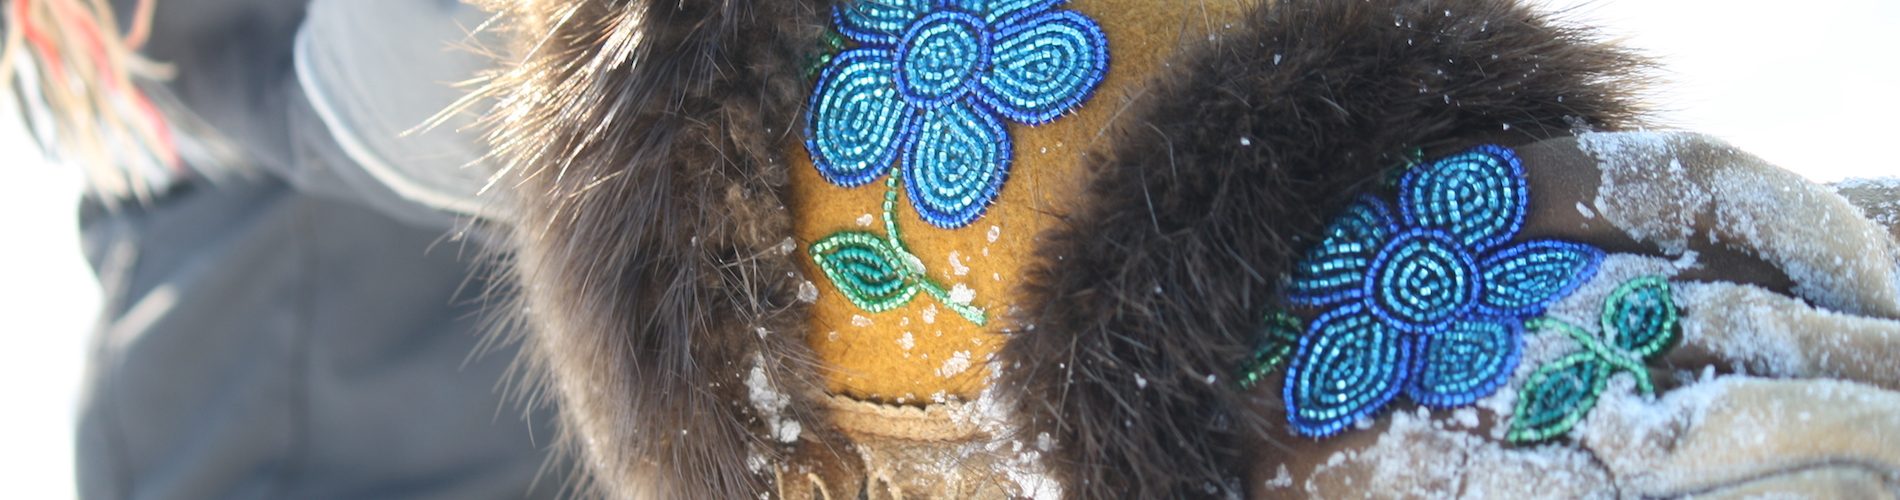 leather mitten with traditional first nations beadwork